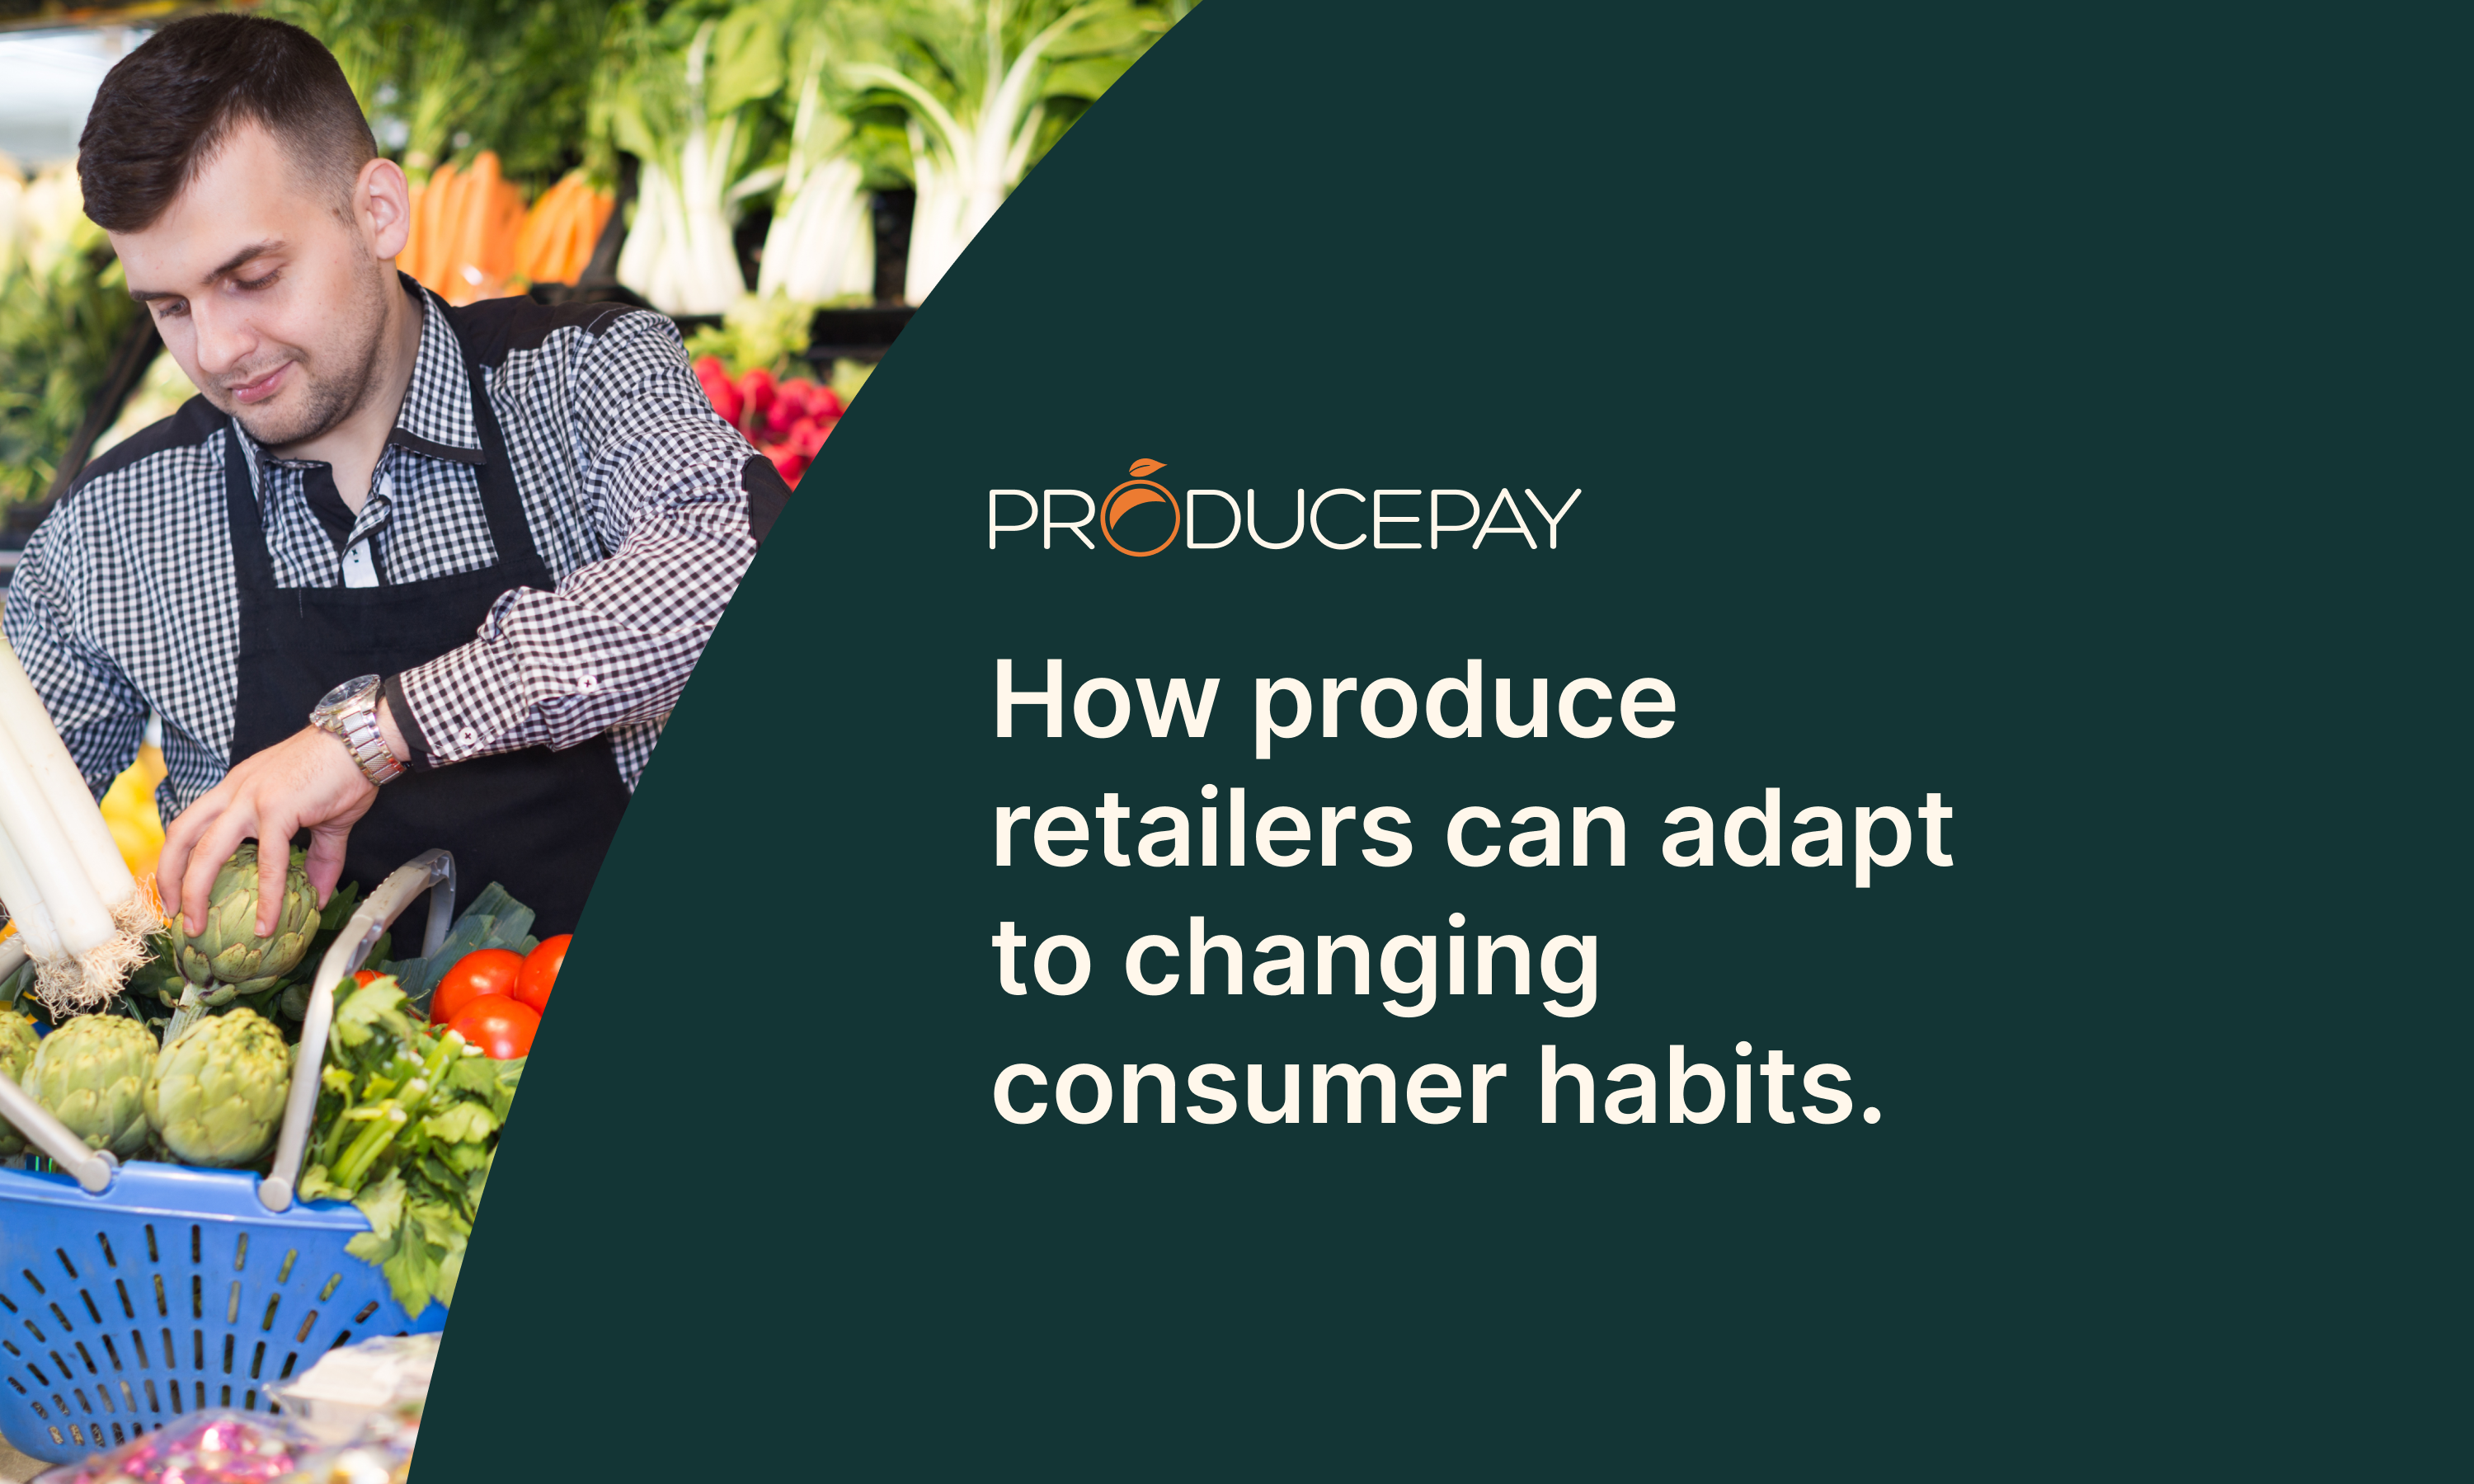 How produce retailers can adapta to changing consumer habits